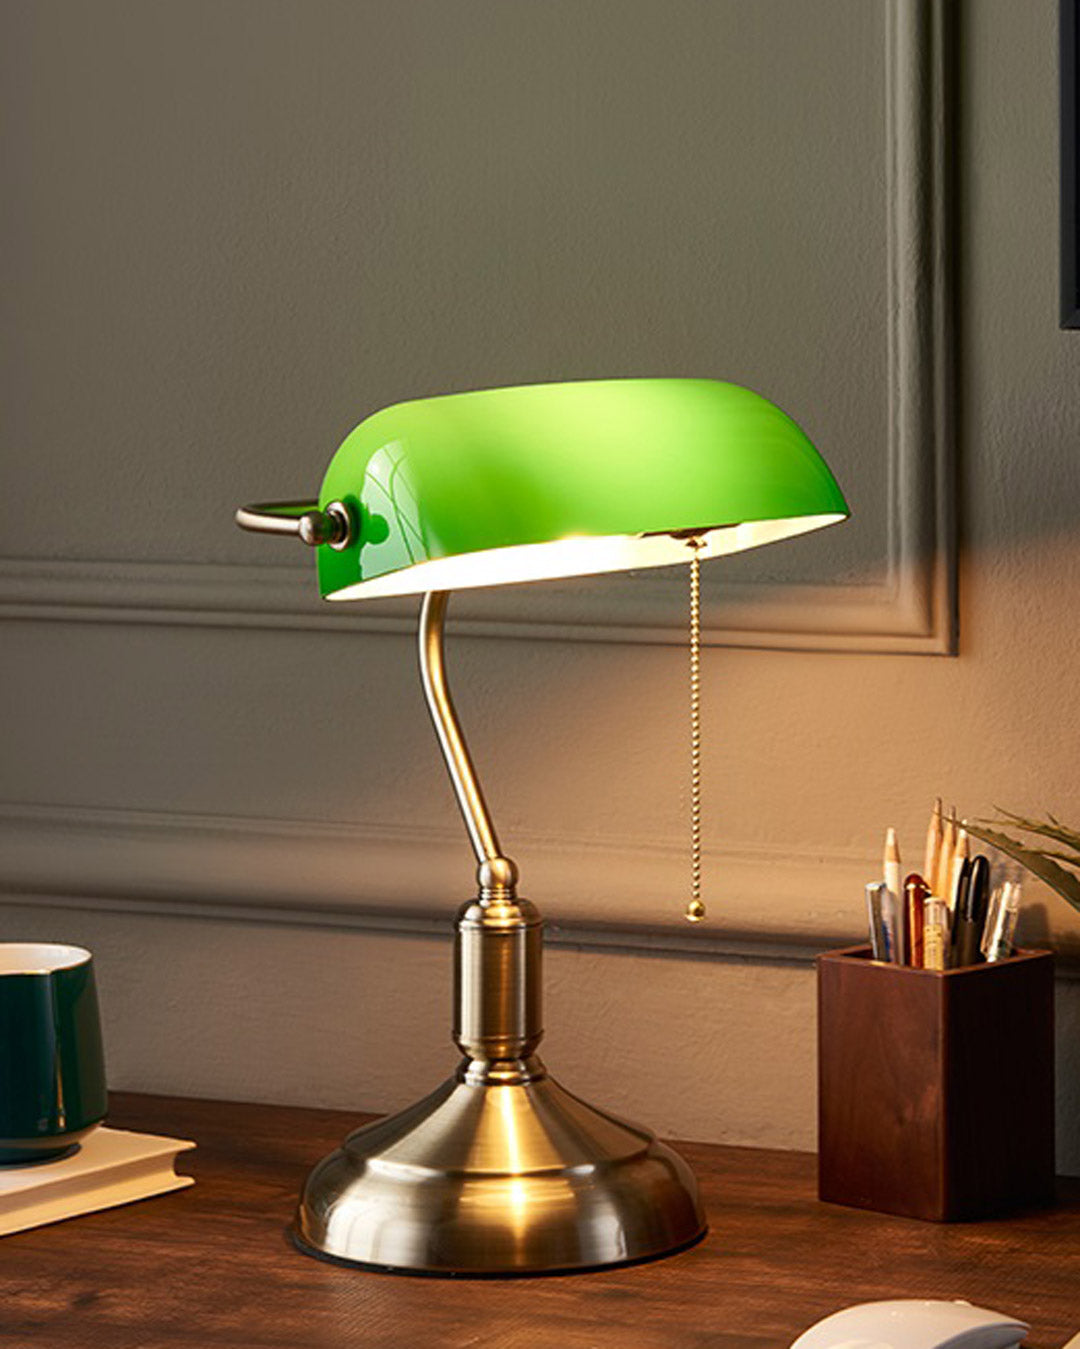 Elegant Classic Banker's Lamp with green glass shade and brass base on office desk.